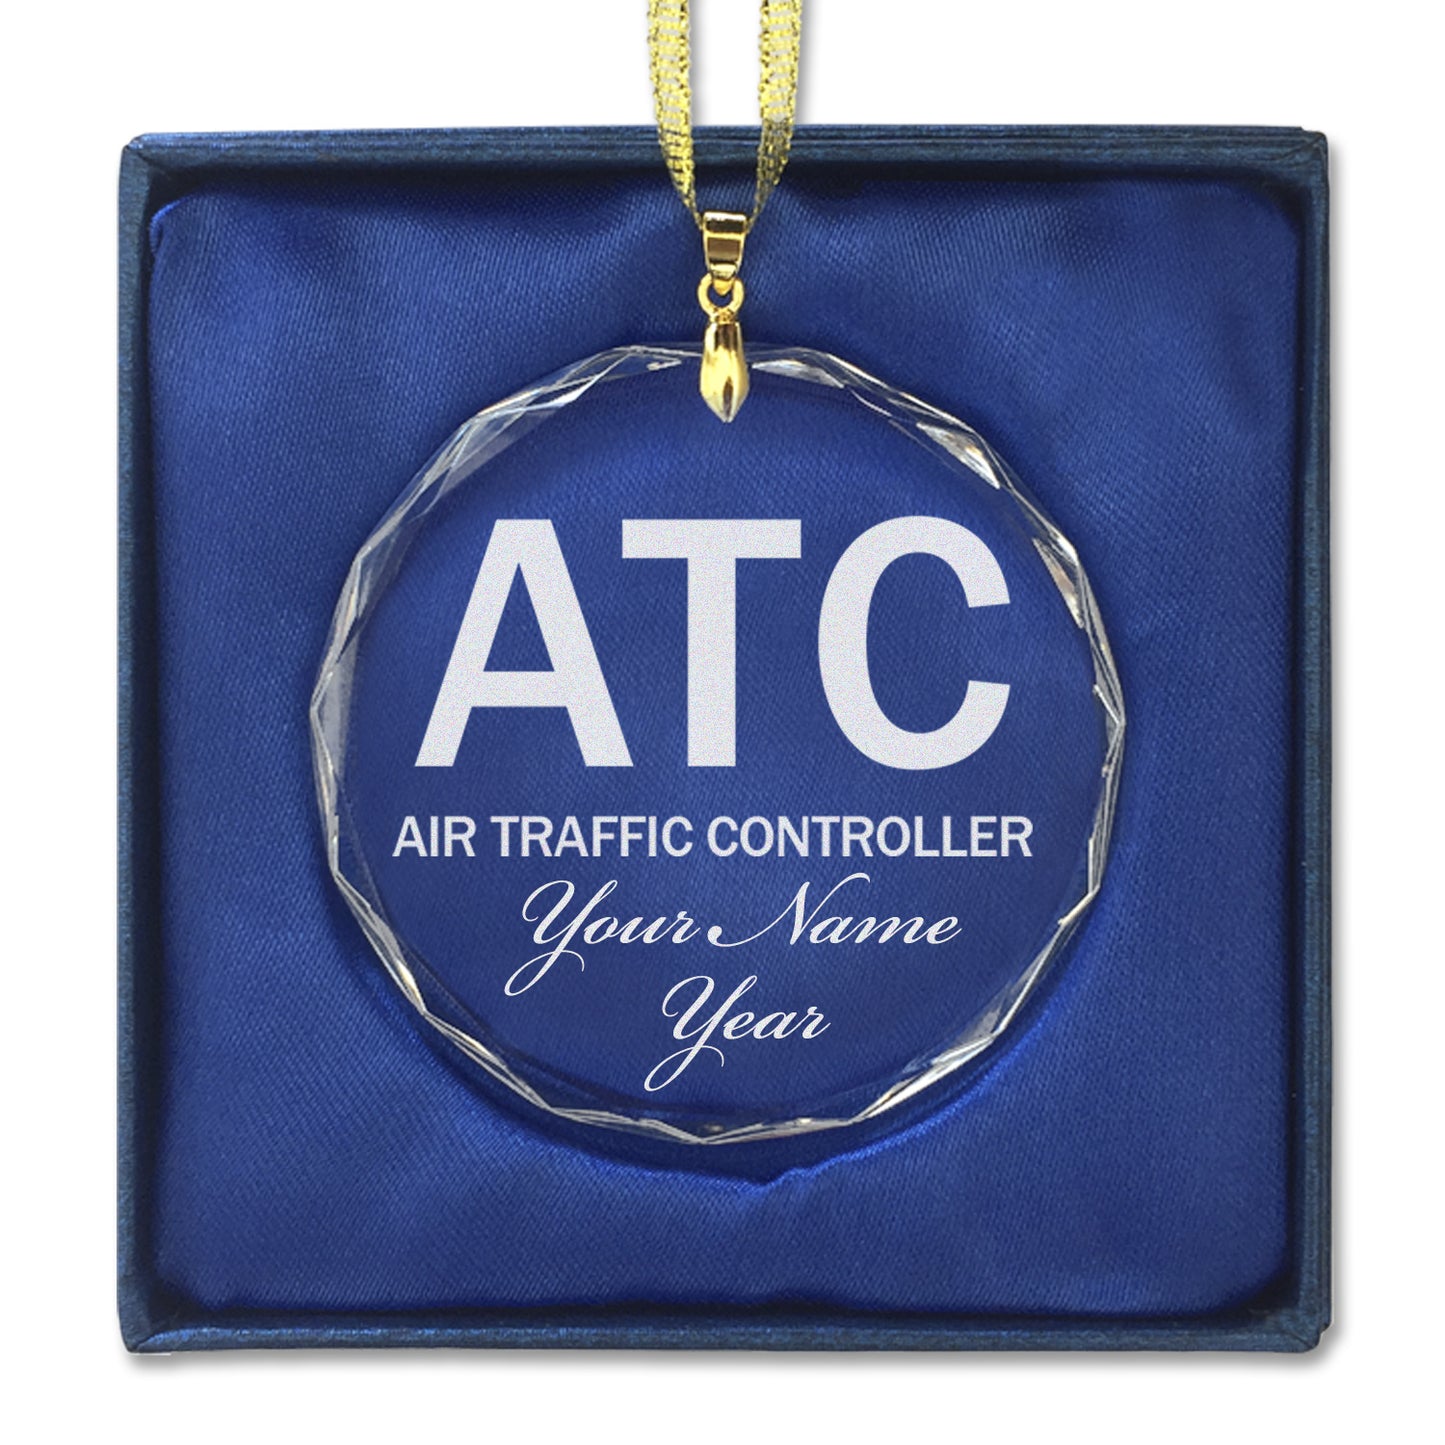 LaserGram Christmas Ornament, ATC Air Traffic Controller, Personalized Engraving Included (Round Shape)